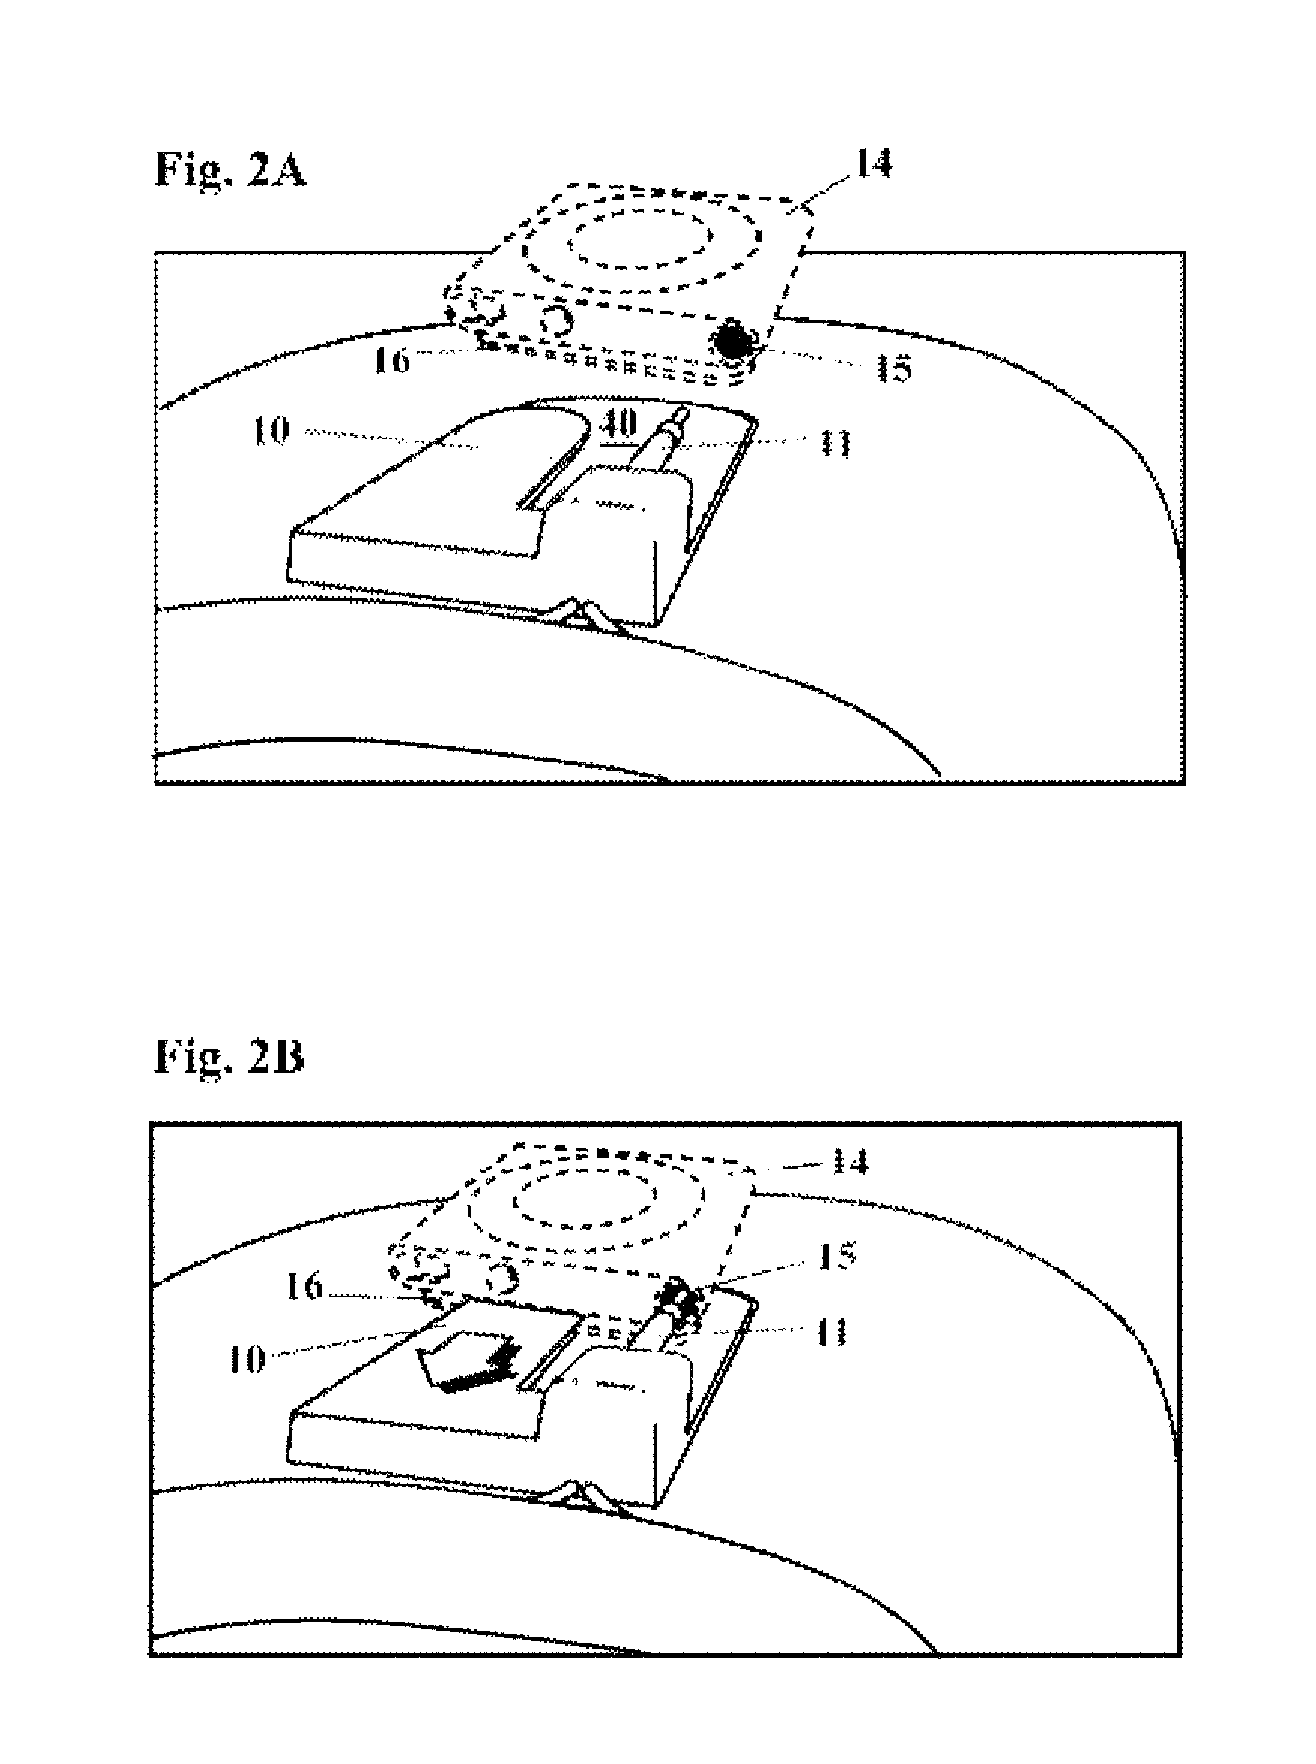 Apparatus for mounting an audio player